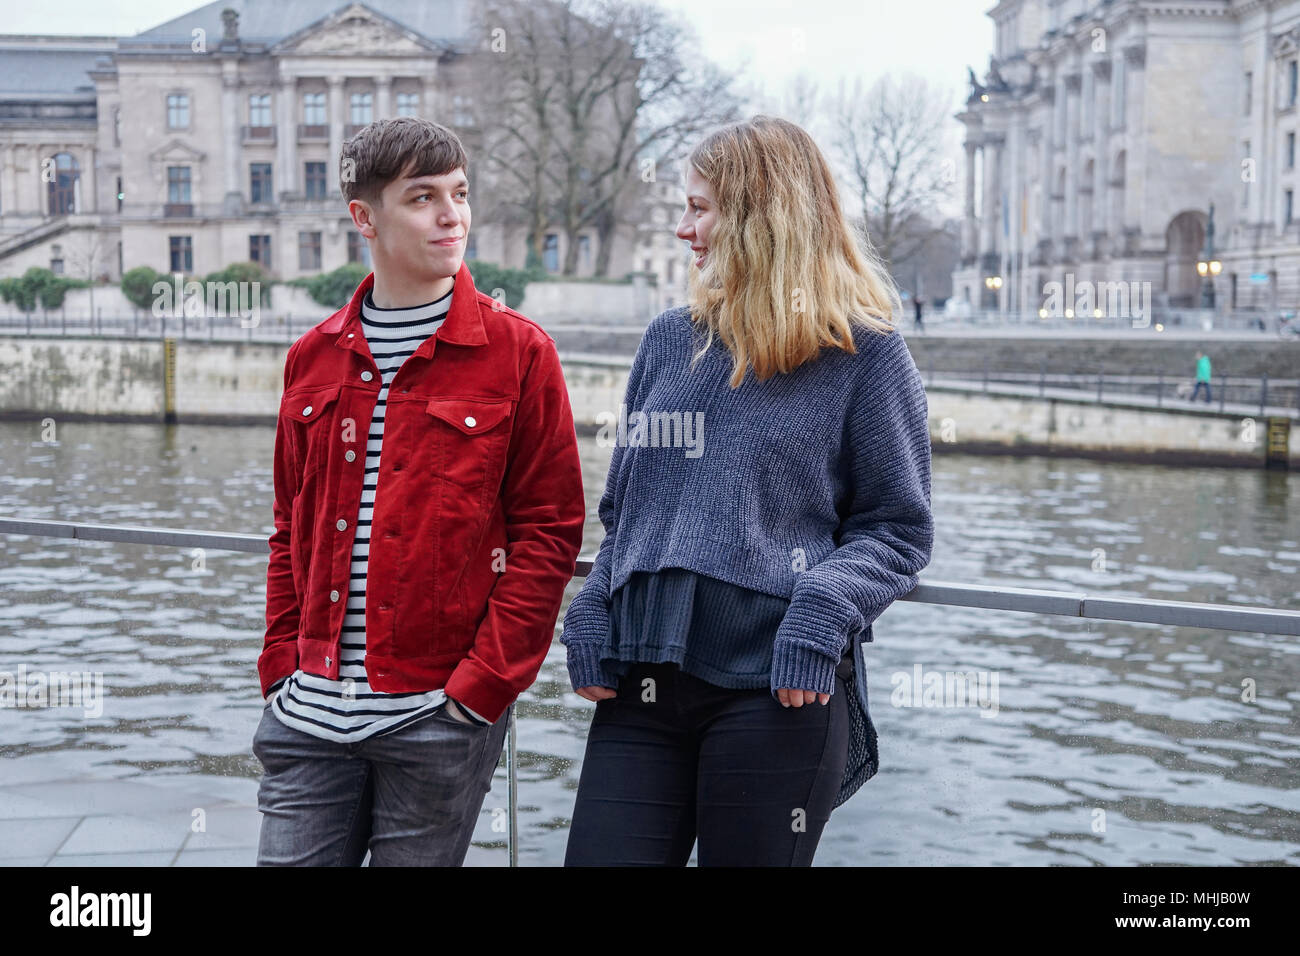 young woman and man hanging out by the river Spree in Berlin, Germany, with Bundestag Reichstag building in the background Stock Photo